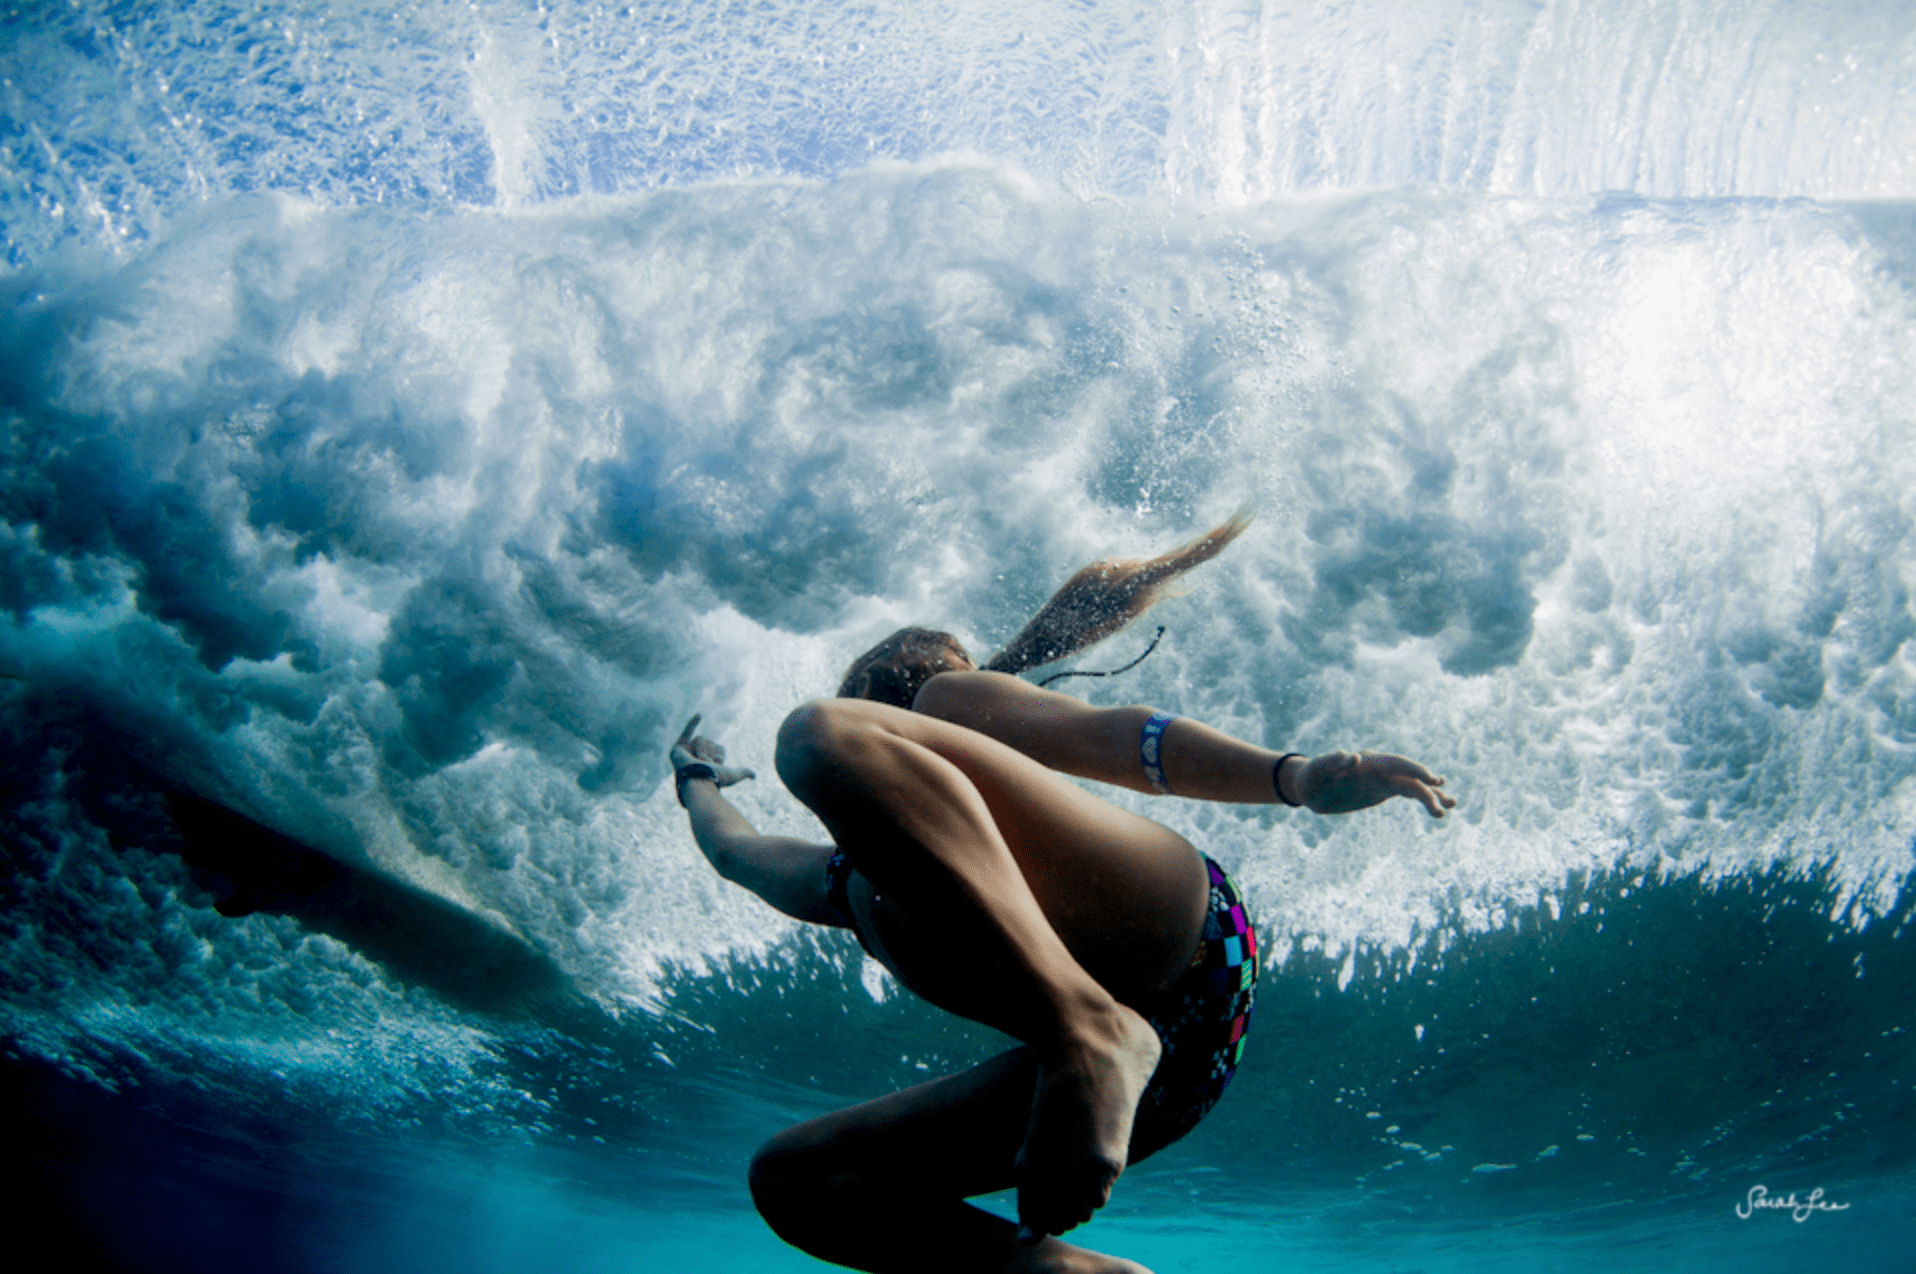 The Beautiful And Surreal Sensuality Of Sarah Lee’s Underwater Photos